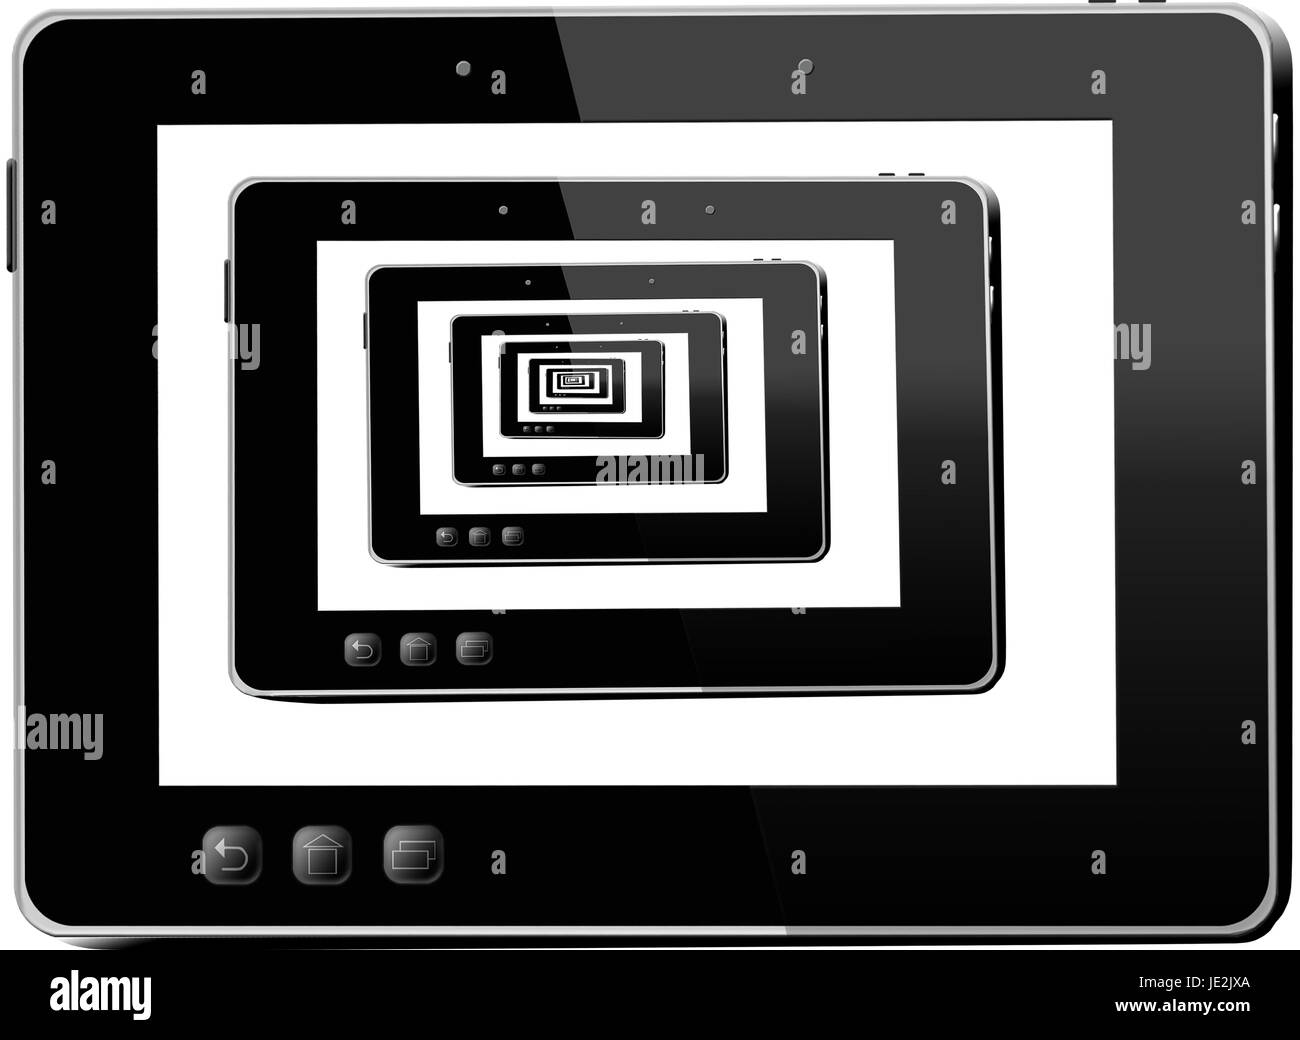 illustration of black tablets in black tablets isolated on white background Stock Photo